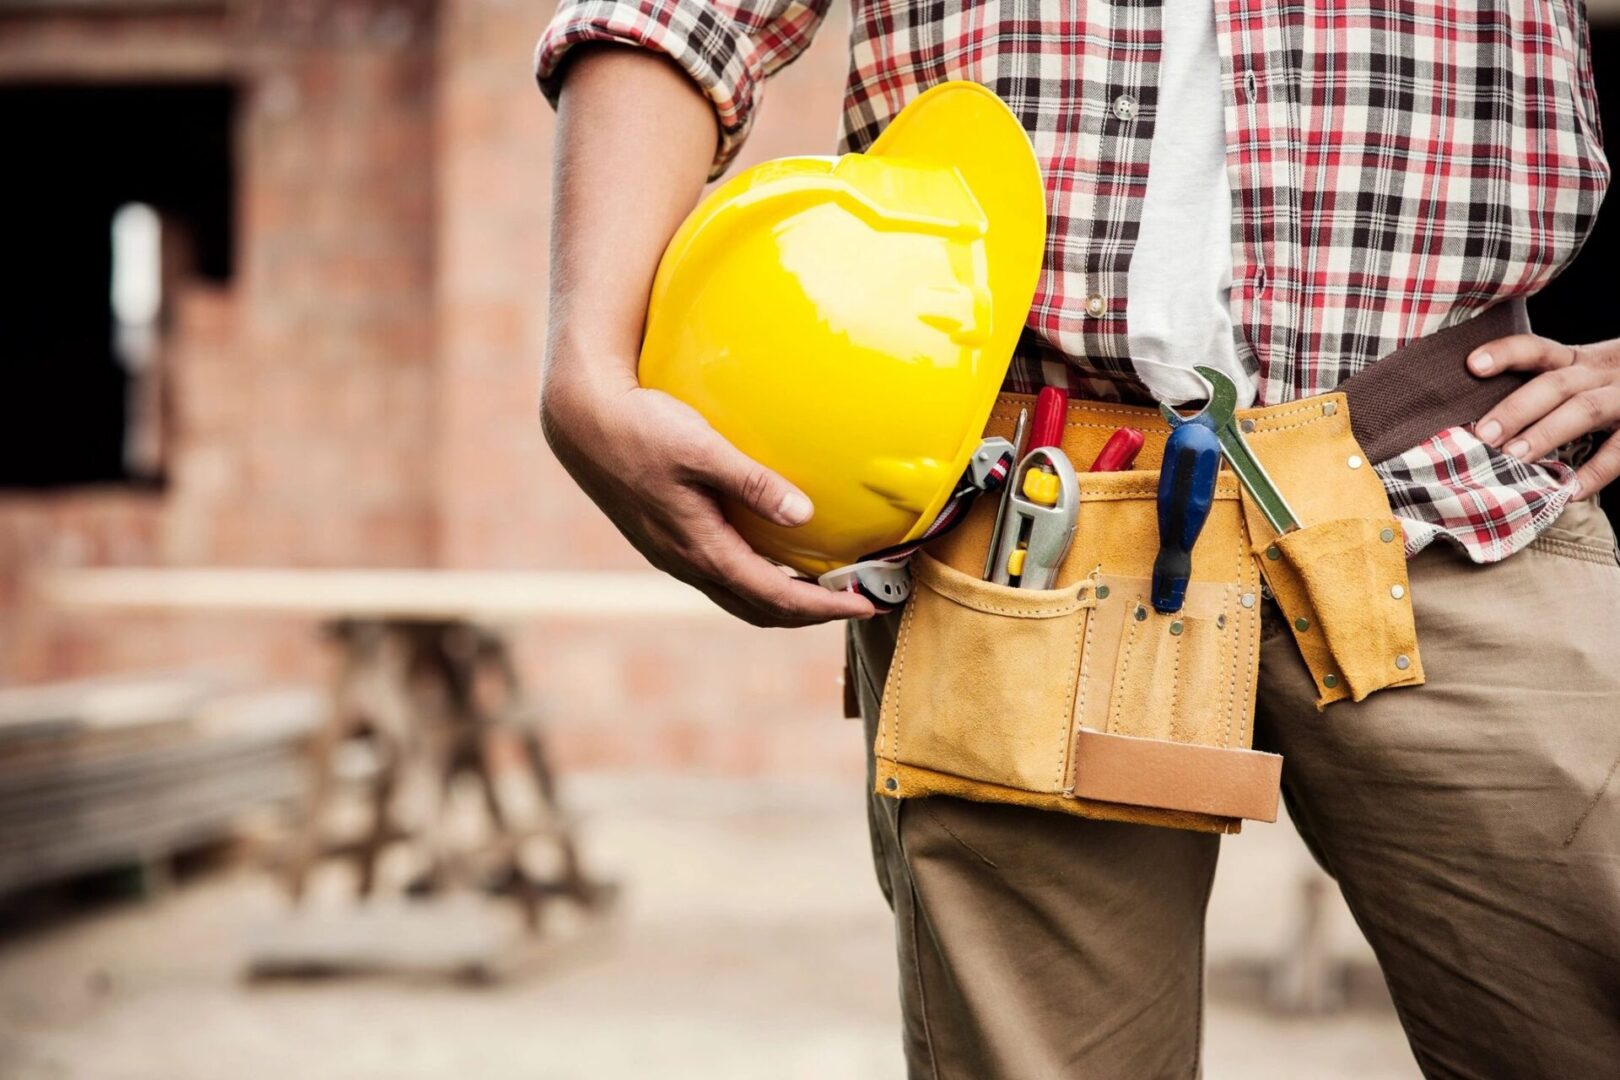 A person standing while holding a hard hat